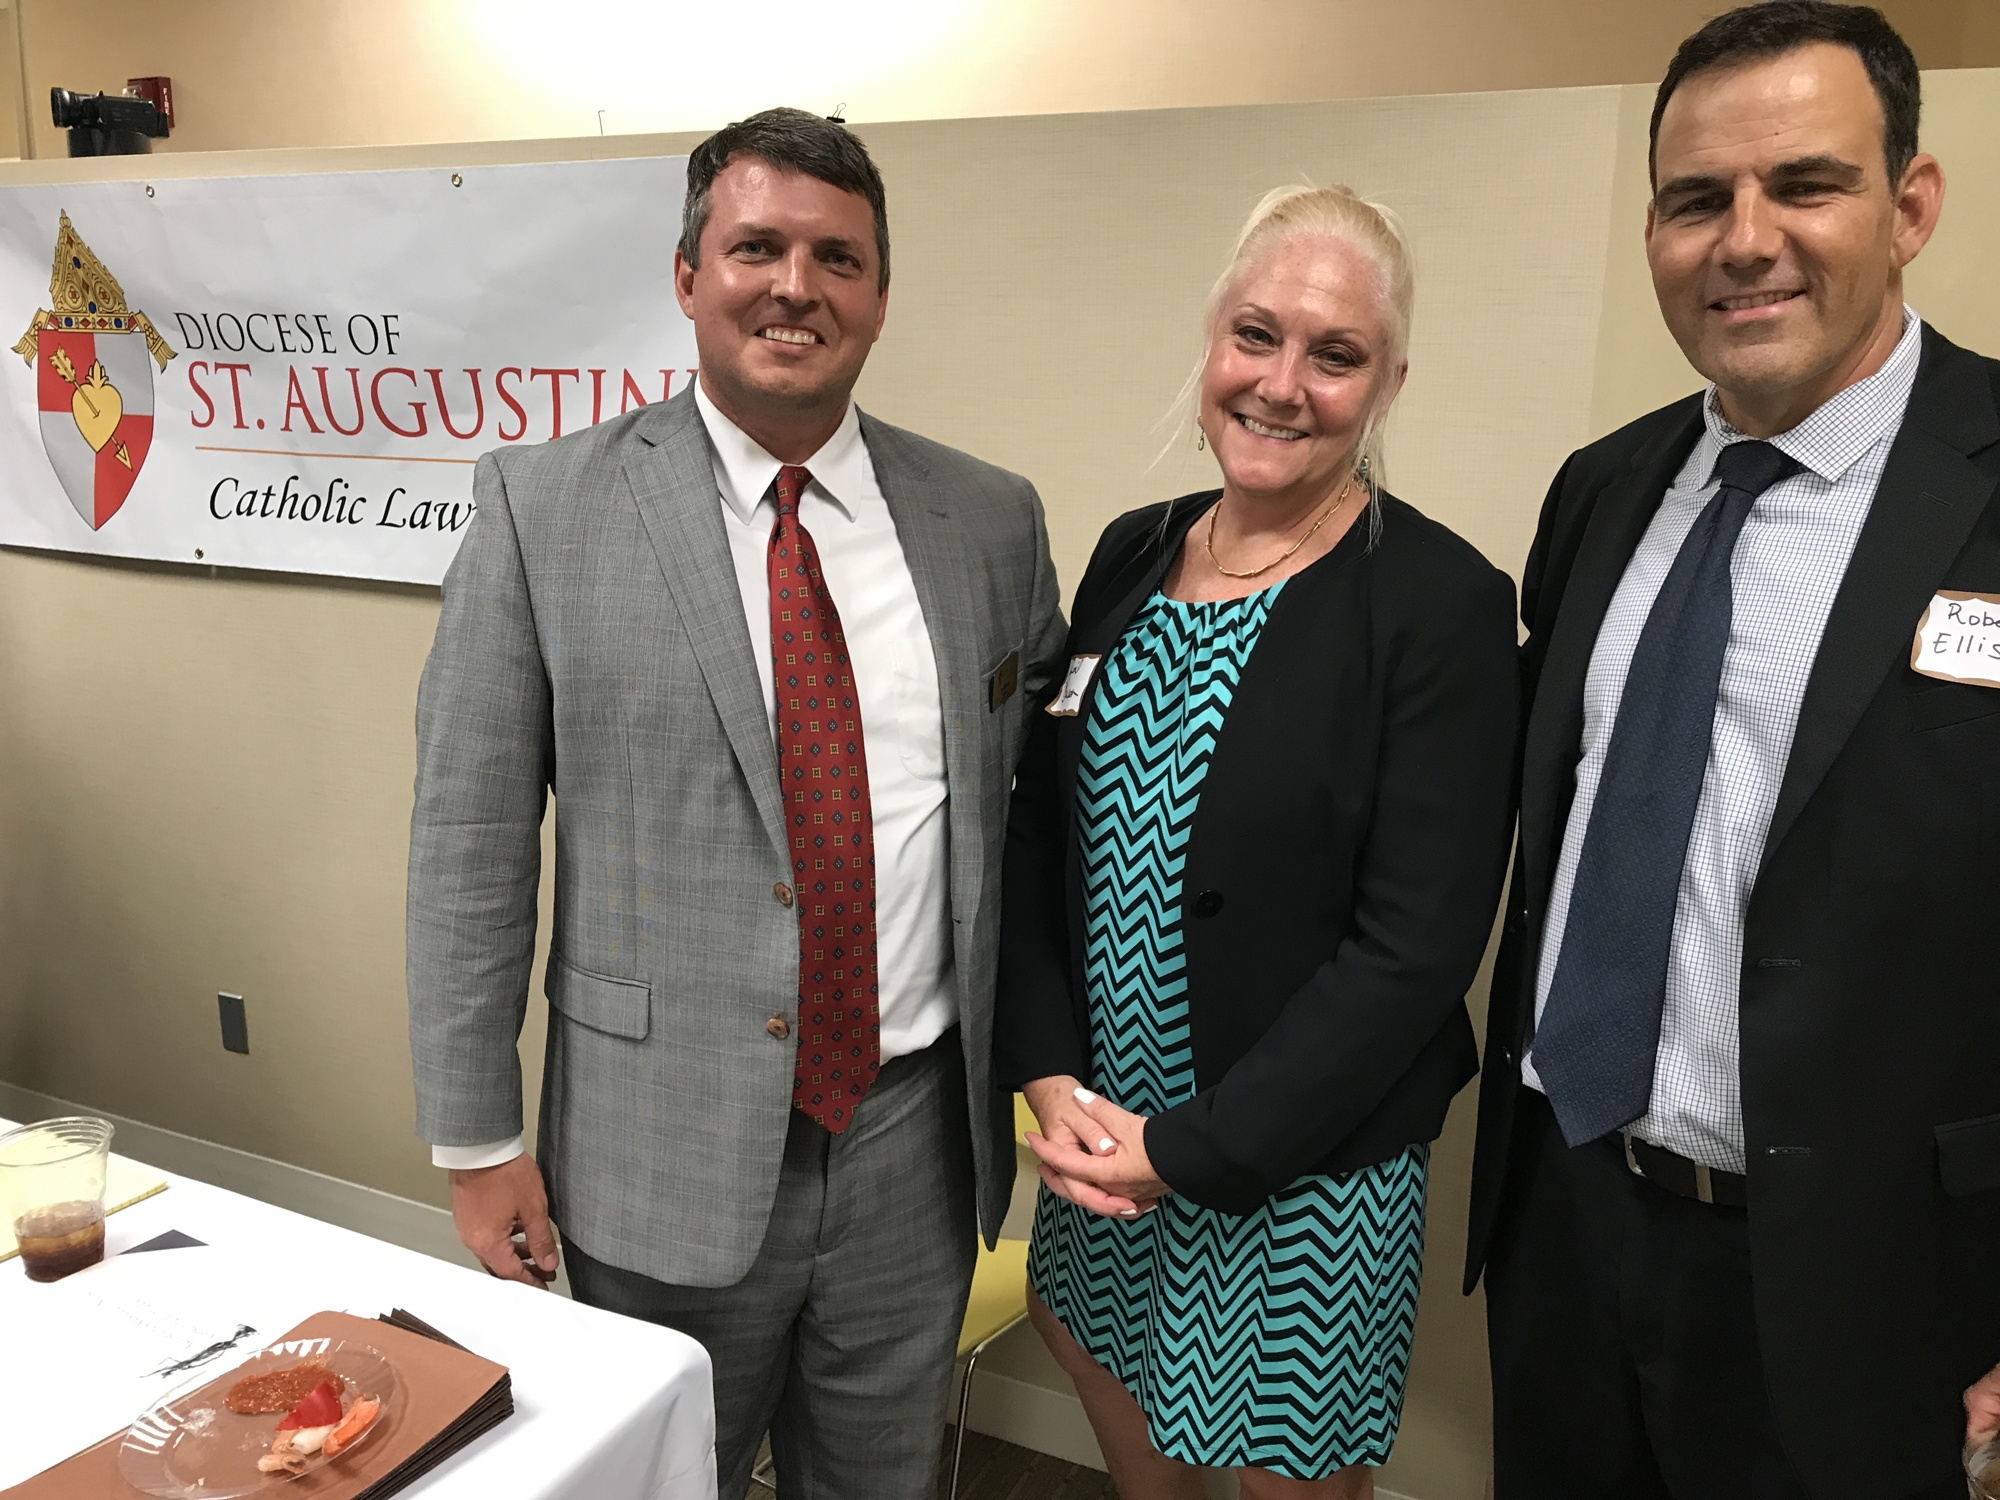 The Catholic Lawyers Guild – Diocese of St. Augustine, represented by President Ian Weldon, Gail Dawson and Robert Ellis.